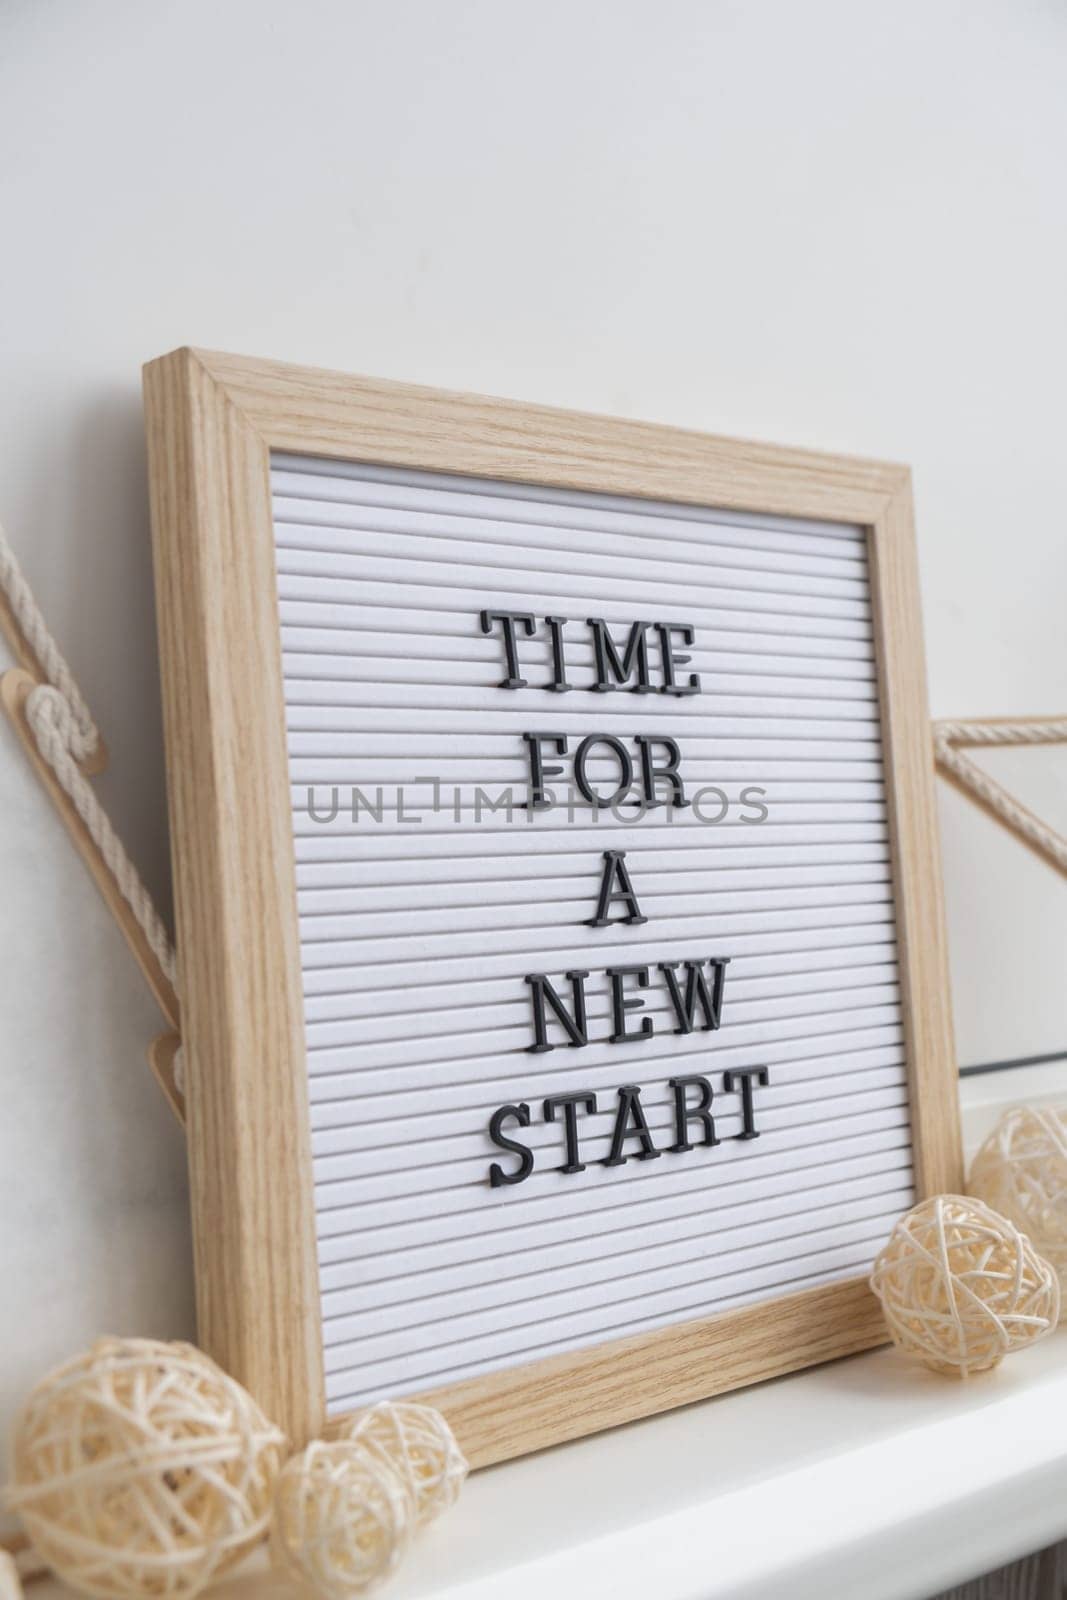 Motivational saying TIME FOR A NEW START. Goals setting concept. Strategy for self development improvement. Inspirational Planning better healthier life. Visual by anna_stasiia